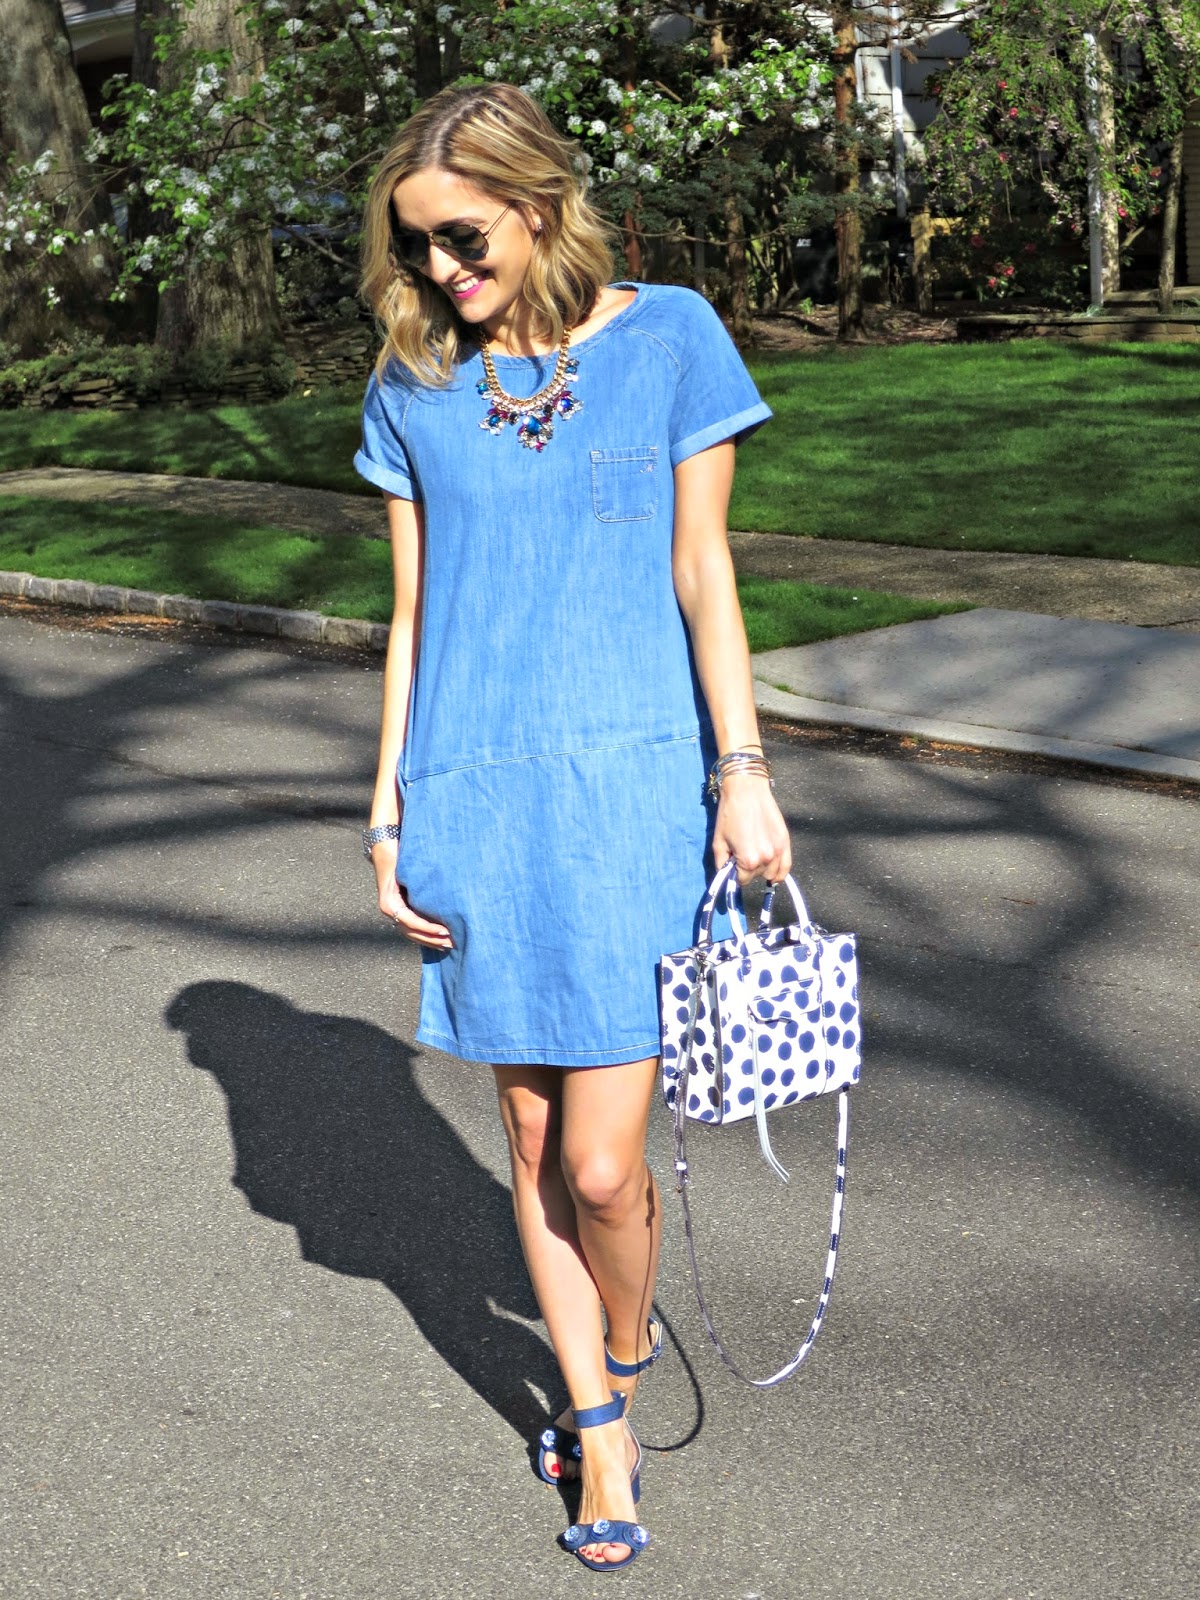 Michelle's Pa(i)ge | Fashion Blogger based in New York: DENIM + DOTS